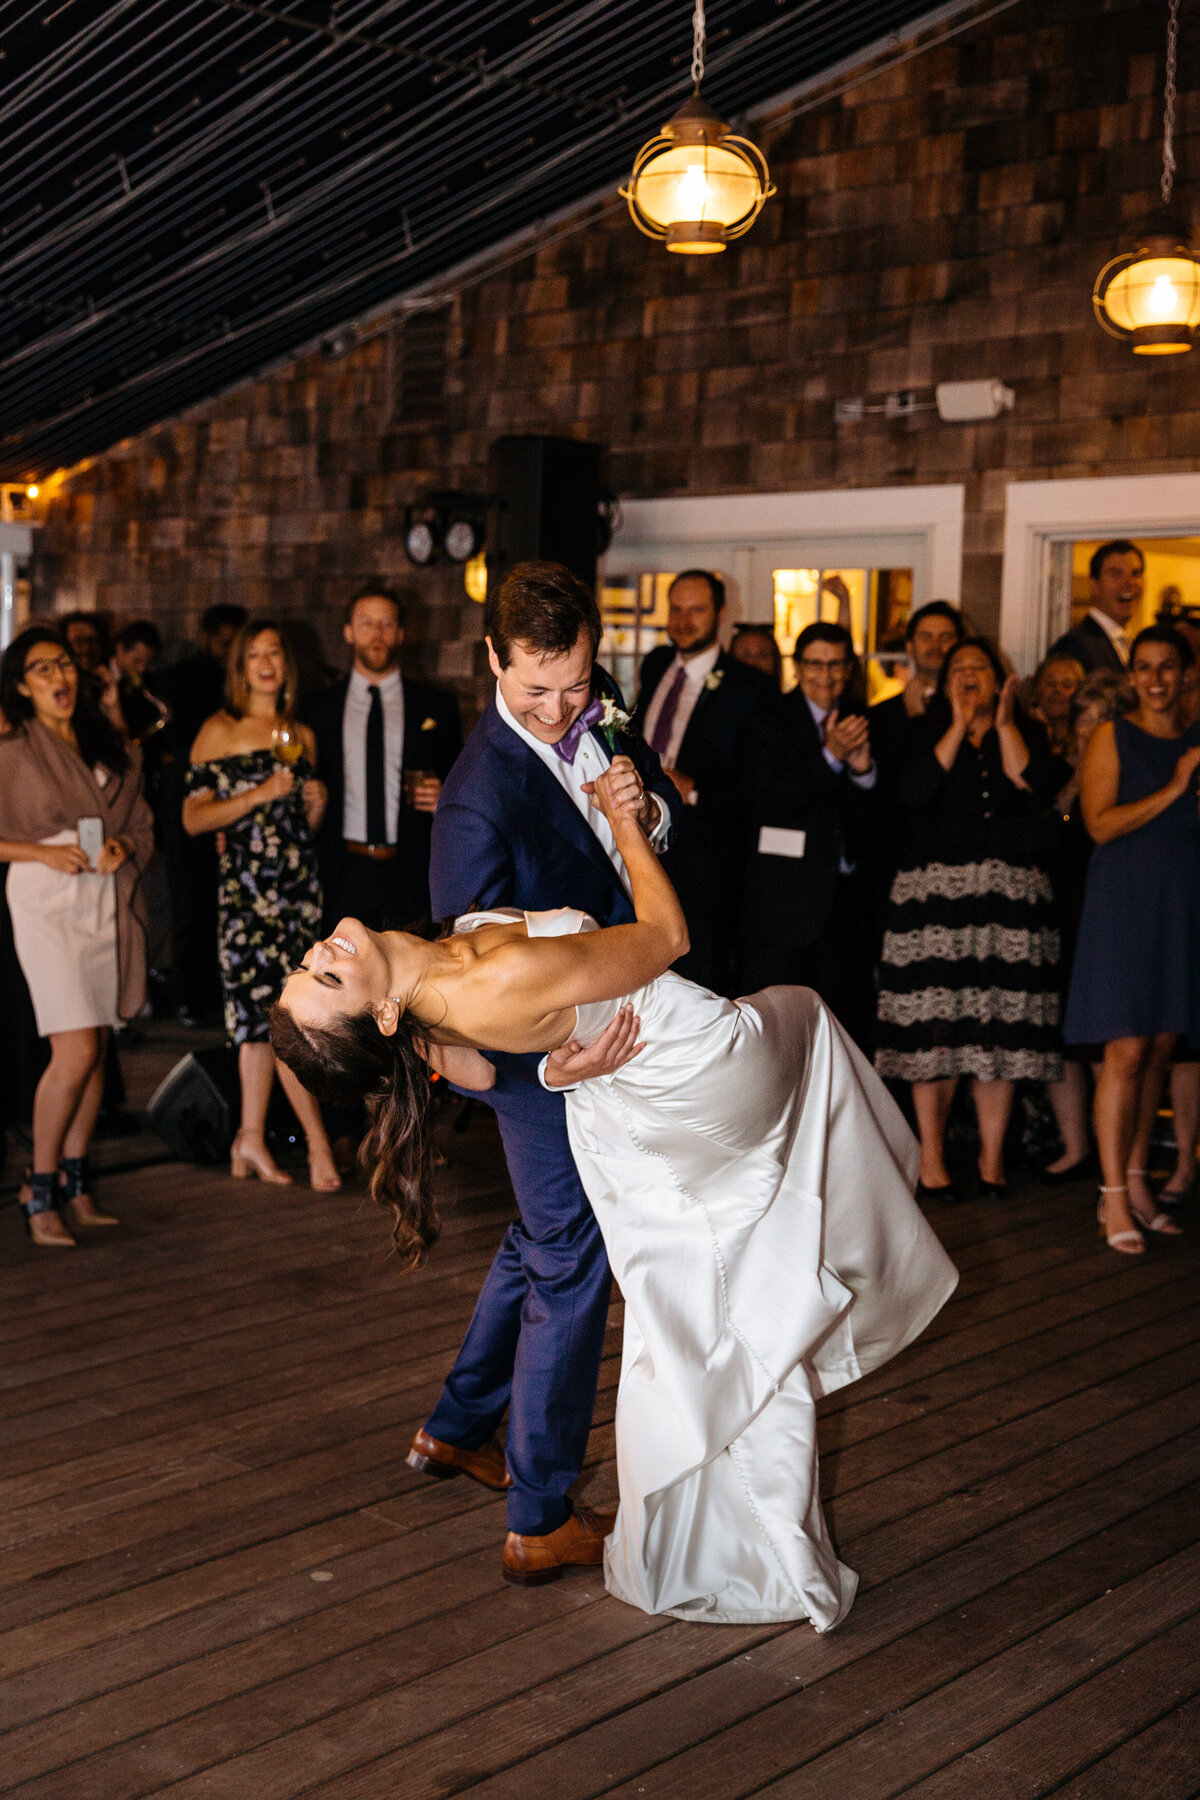 A groom dipping his bride during their first dance.